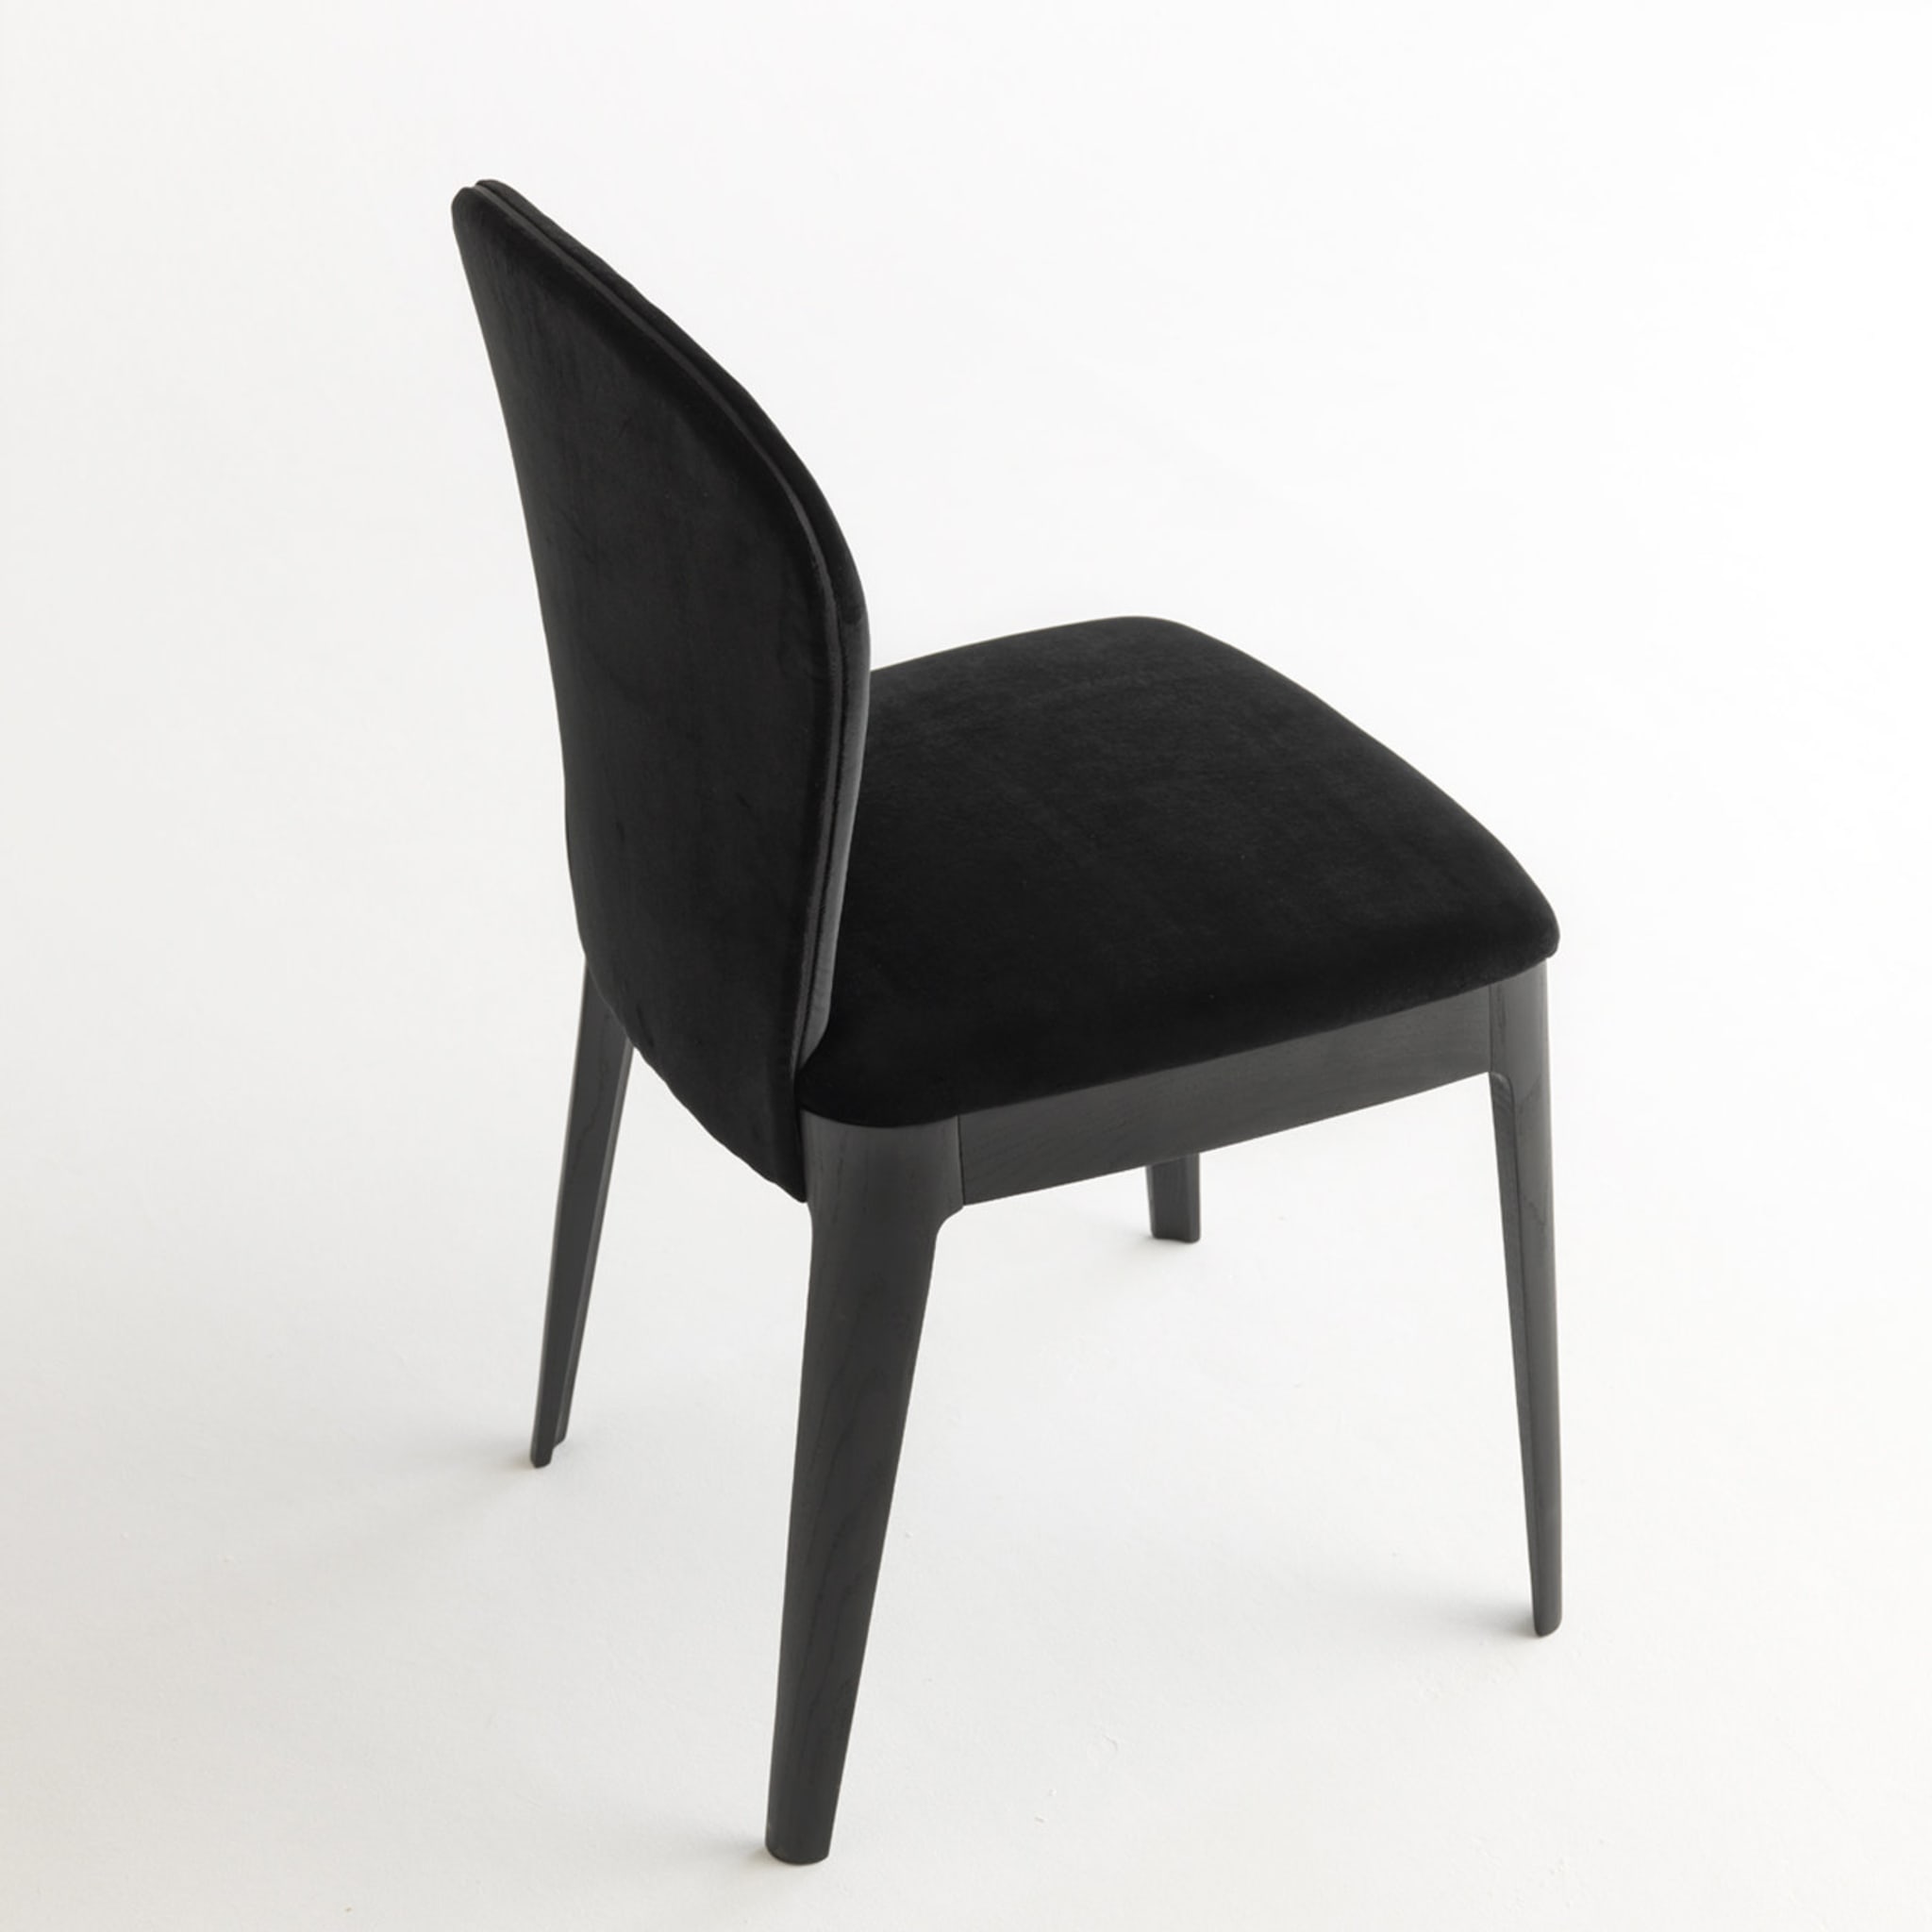 Milady Black Chair by Studio Balutto - Alternative view 1